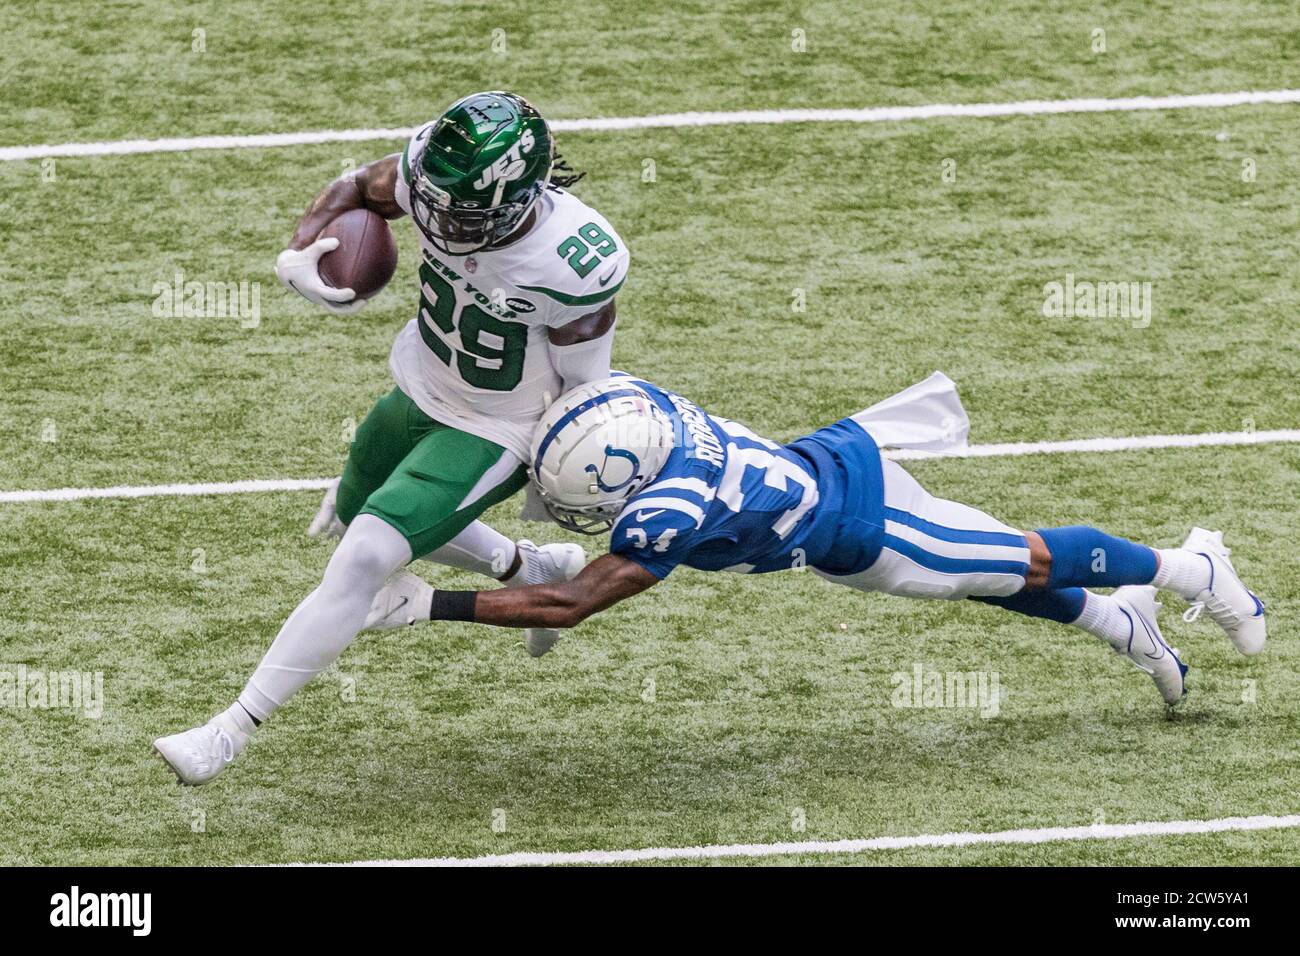 Indianapolis, Indiana, USA. 27th Sep, 2020. New York Jets running back Kalen Ballage (29) is tackled by Indianapolis Colts cornerback Isaiah Rodgers (34) during the game between the New York Jets and the Indianapolis Colts at Lucas Oil Stadium, Indianapolis, Indiana. Credit: Scott Stuart/ZUMA Wire/Alamy Live News Stock Photo